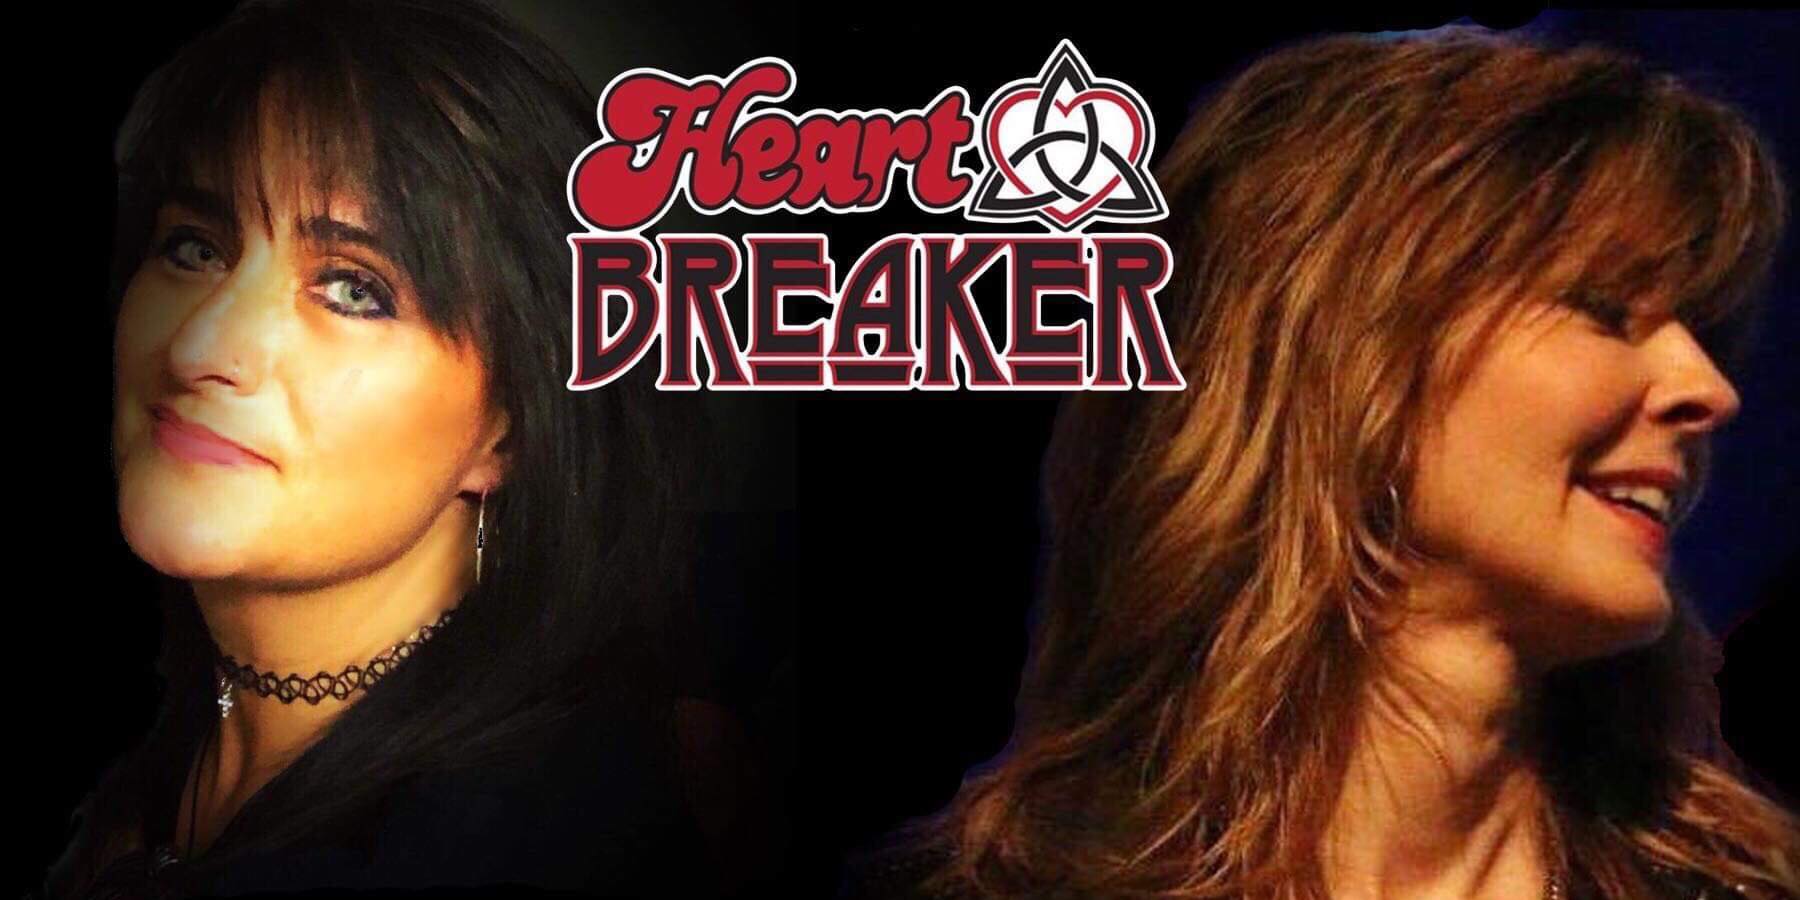 Heart Breaker: A Tribute To Heart with special guest Kristi K. at Elevation 27 promotional image